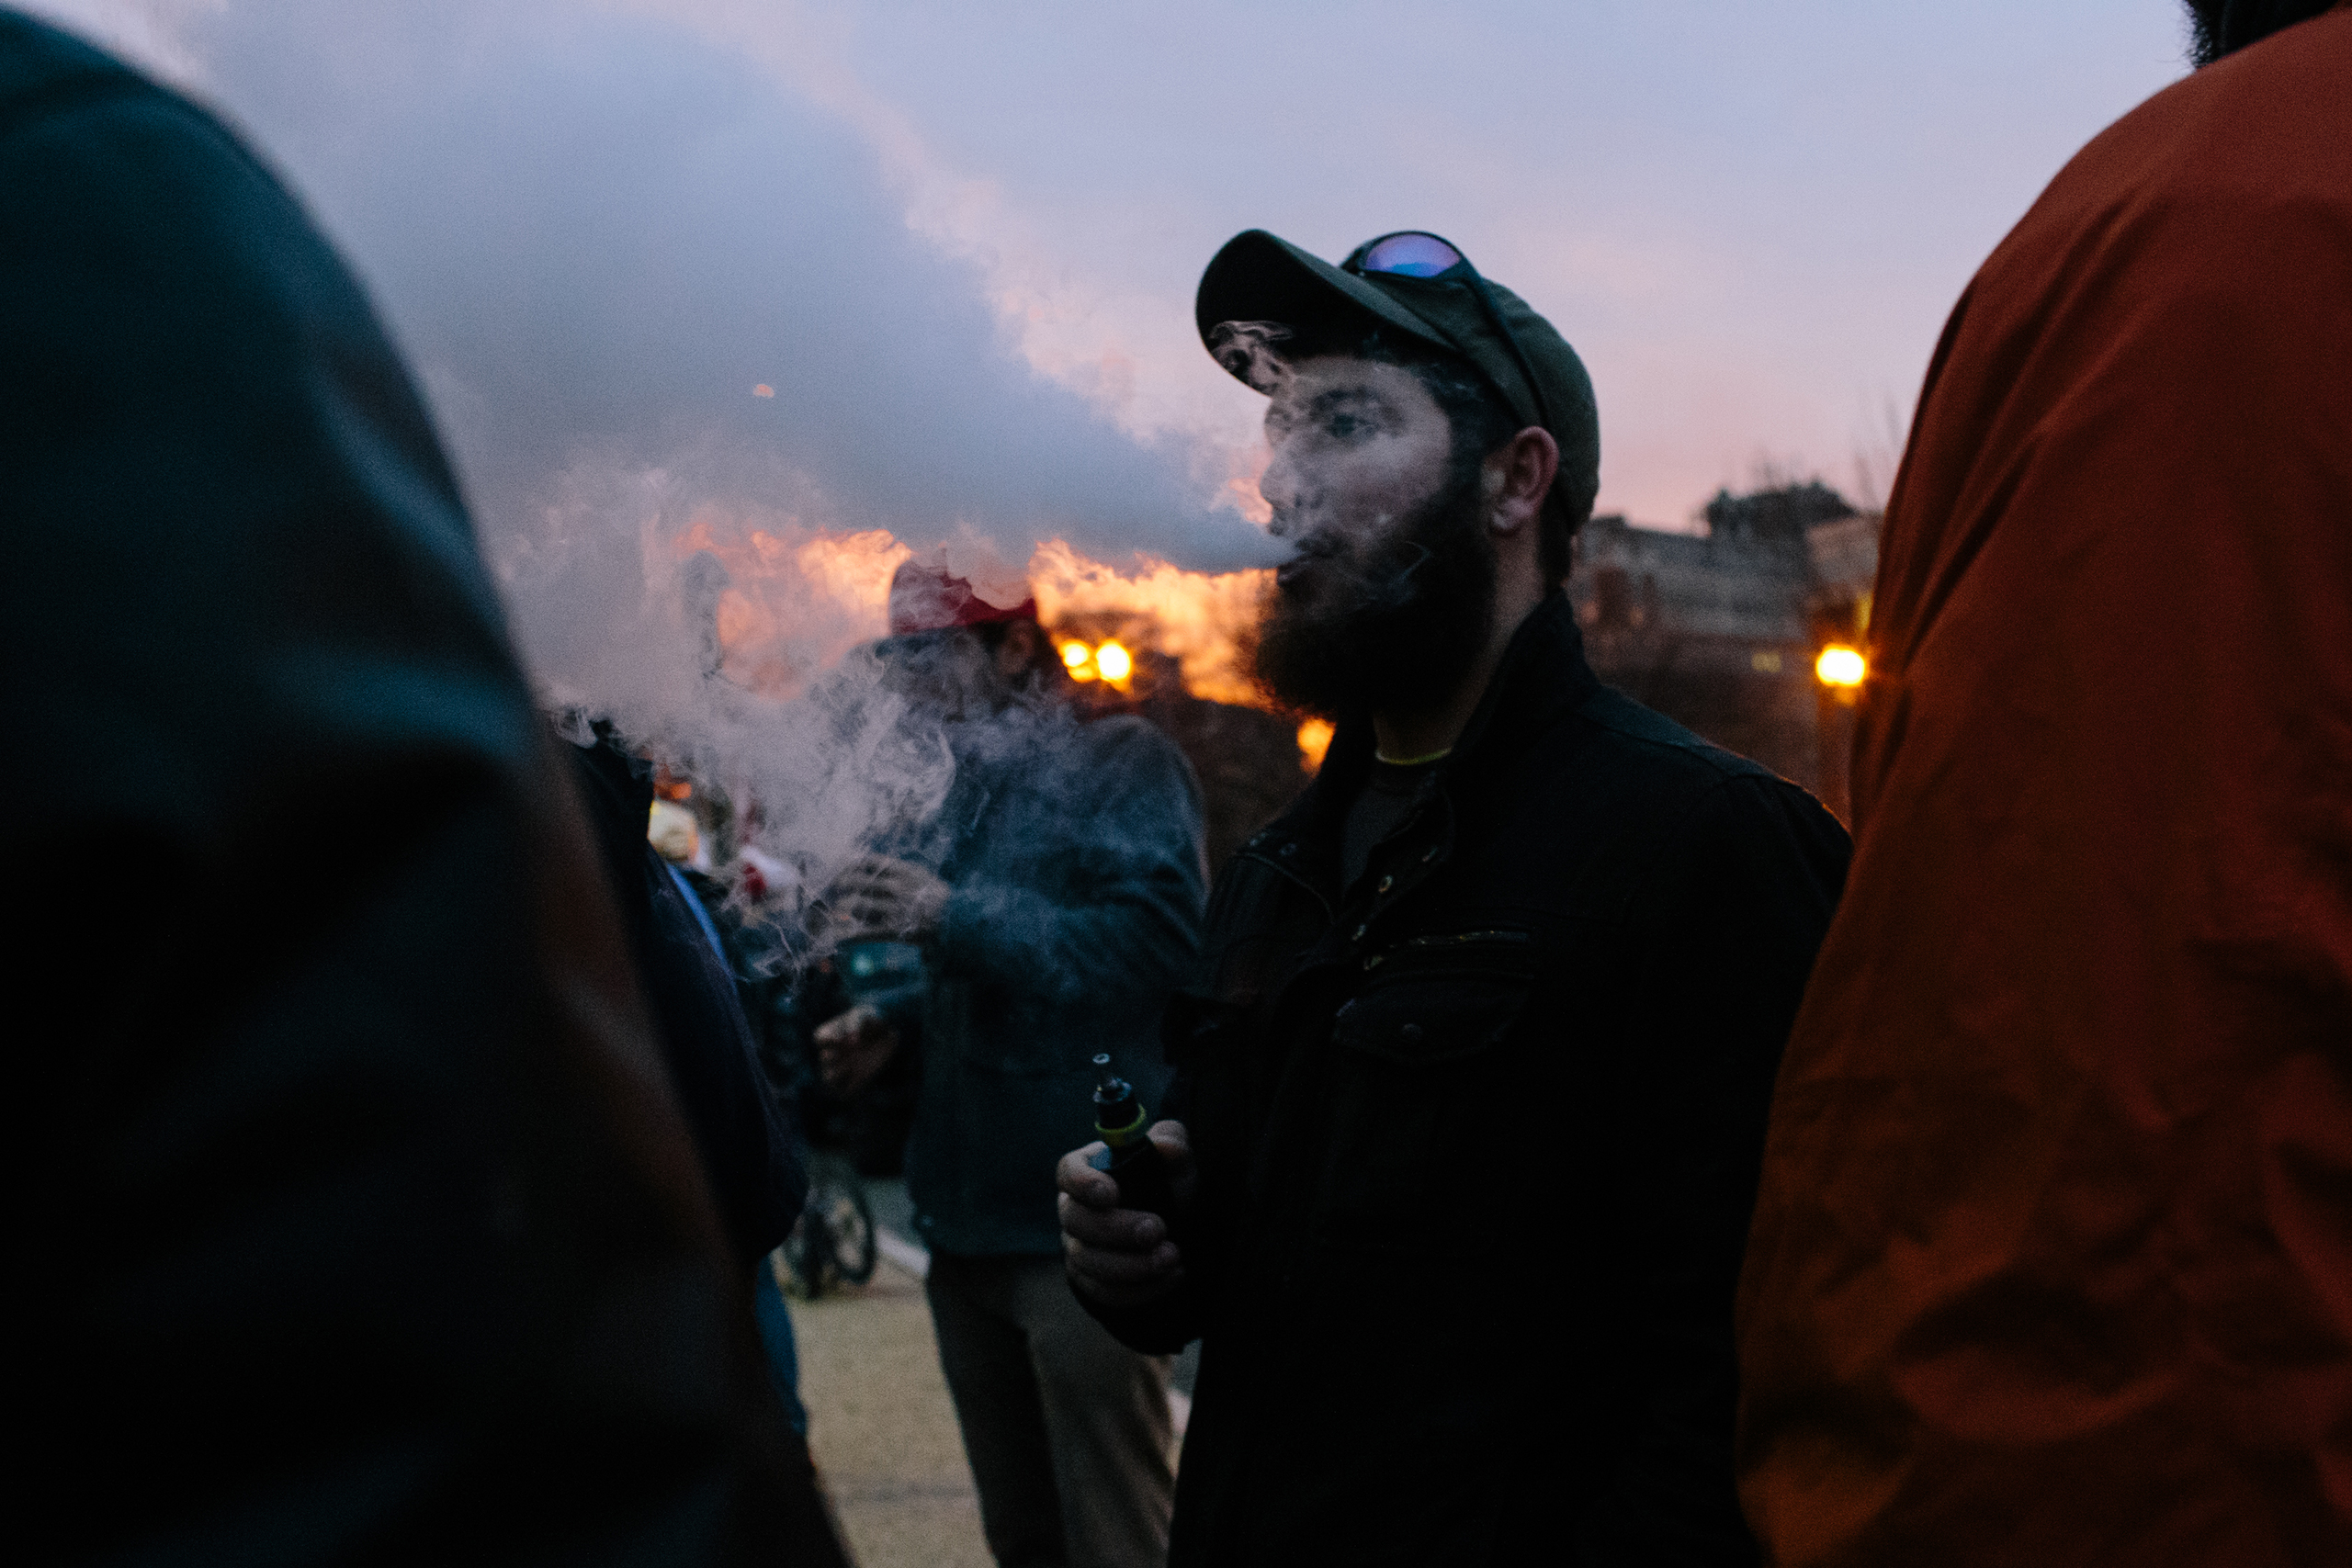 Alex Rider, 29, from Brunswick, Md., smokes a vaporizer while he waits to receive a free joint at the #Trump420 event on Jan. 20, 2017 in Washington.